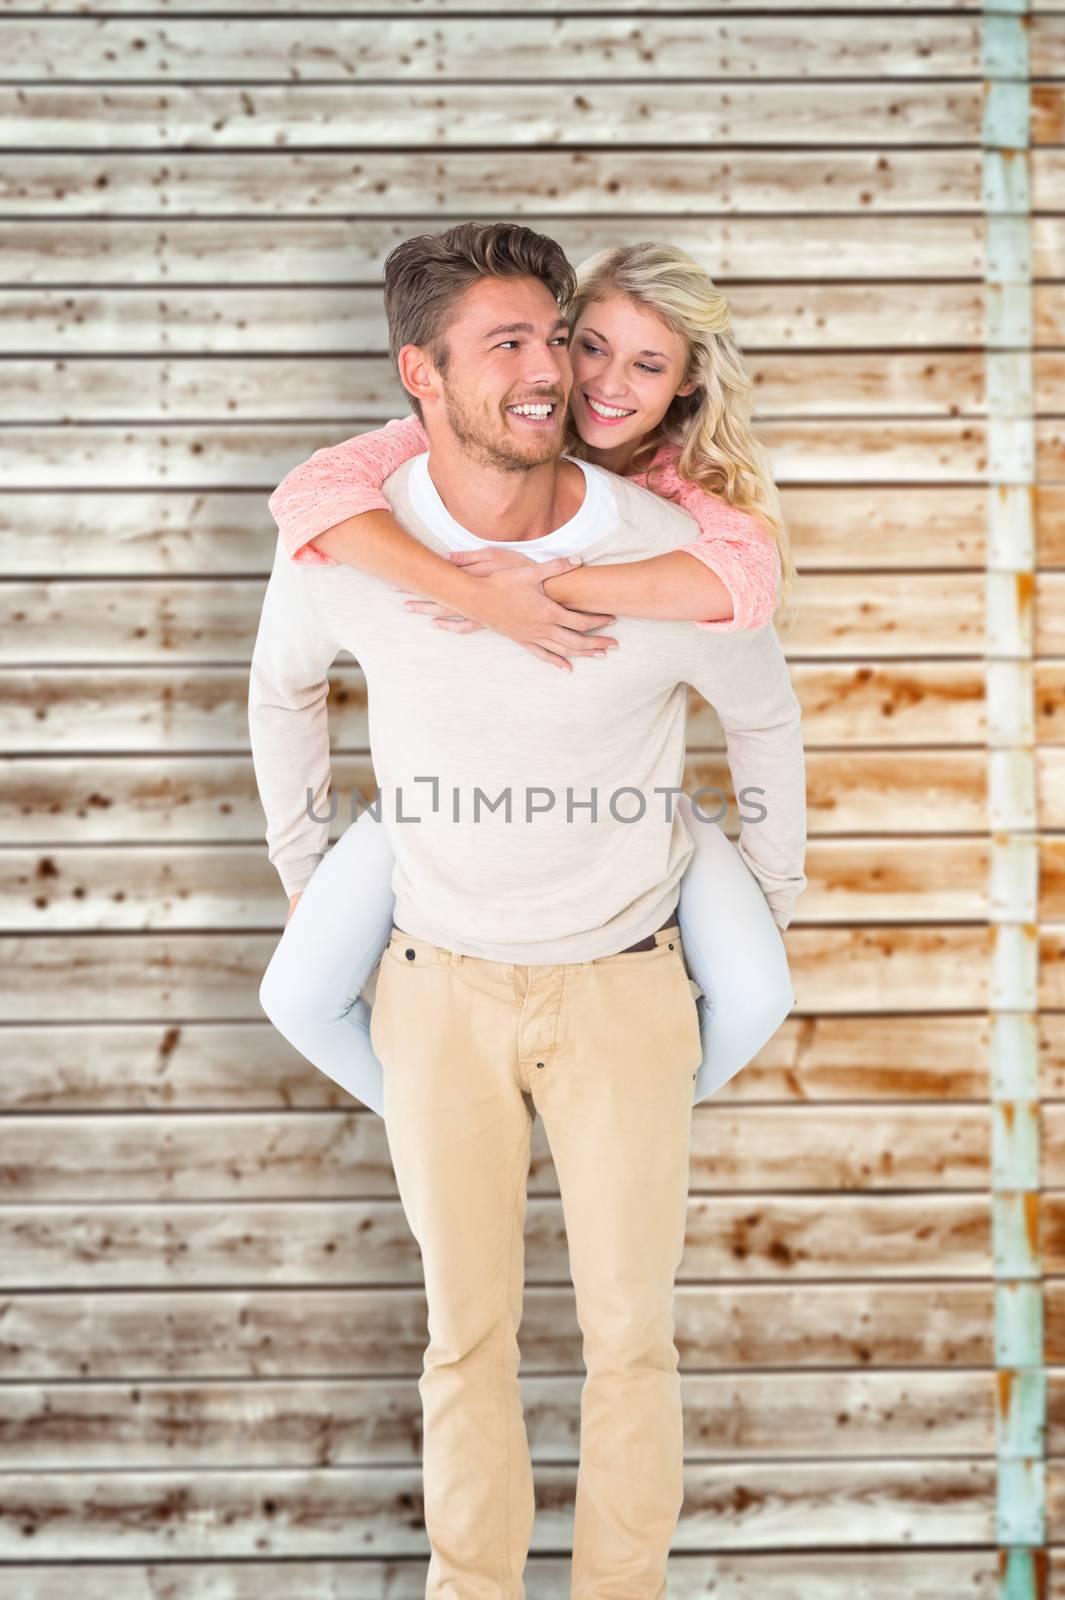 Handsome man giving piggy back to his girlfriend against faded pine wooden planks